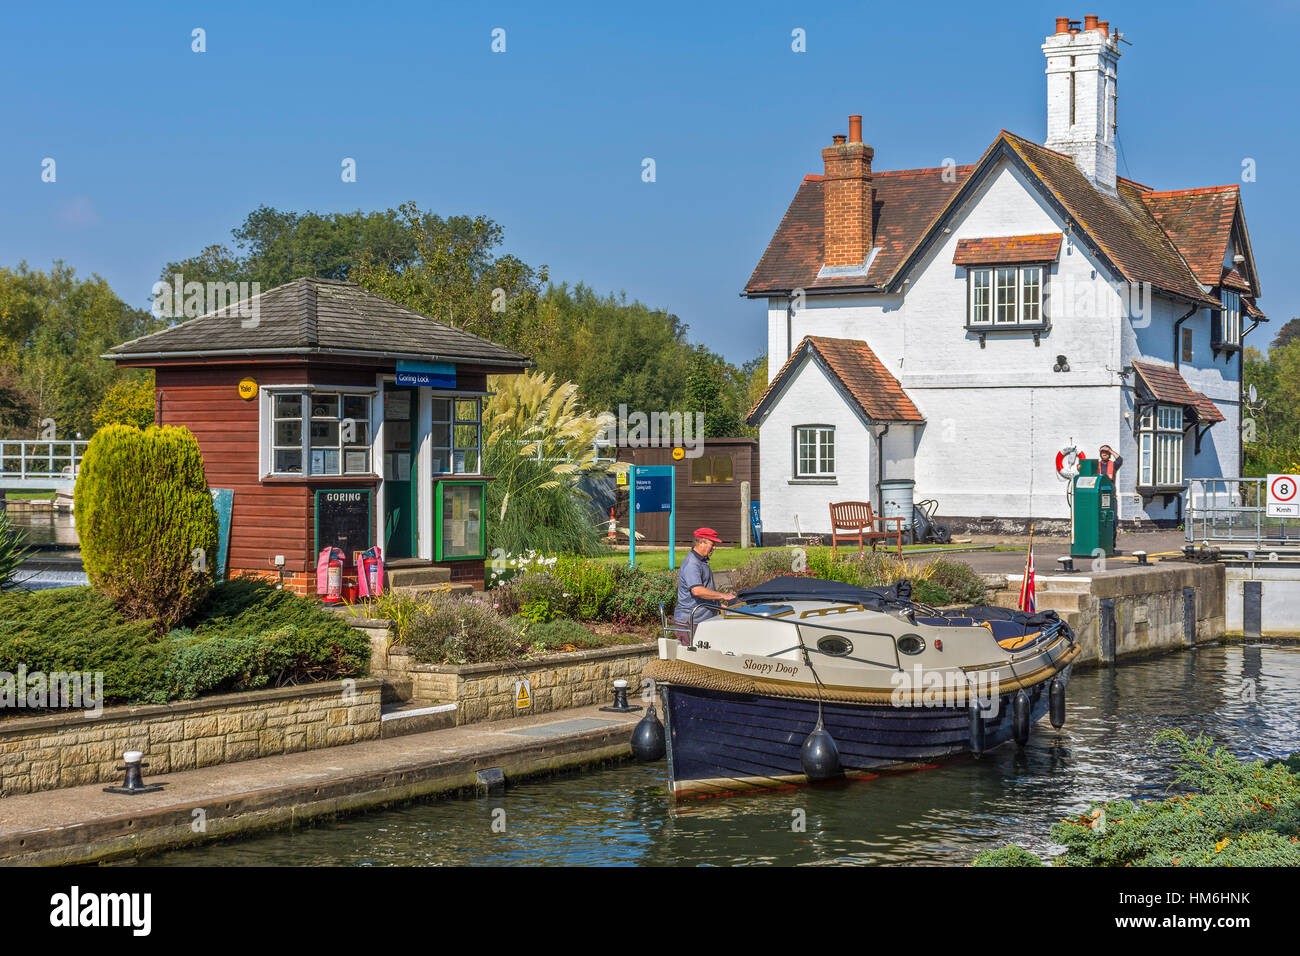 A Boat In Goring Lock Goring On Thames Oxfordshire  UK Stock Photo